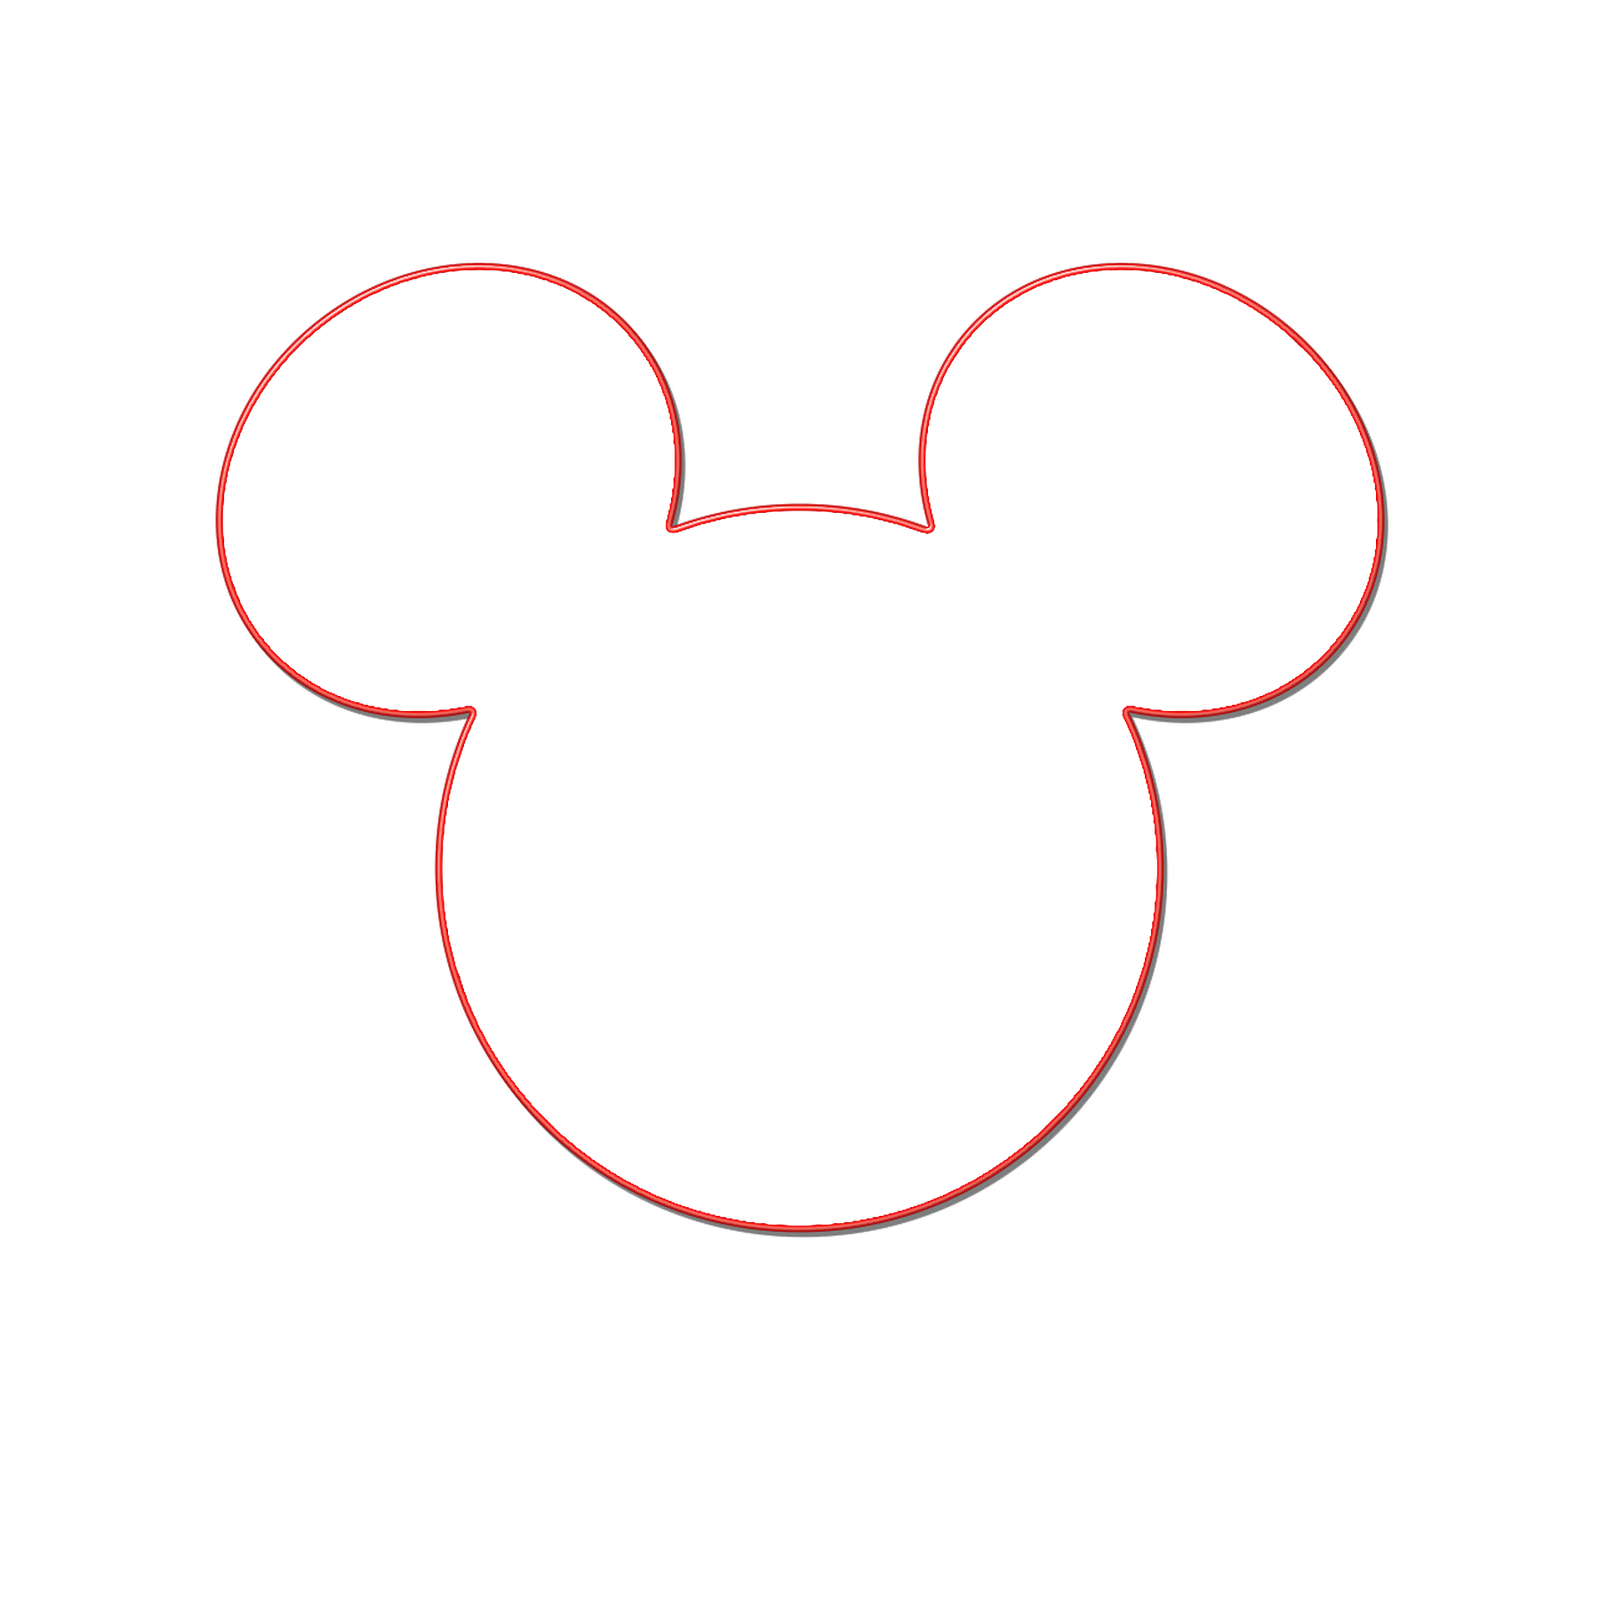  - Mickey Mouse Silhouette Clip Art